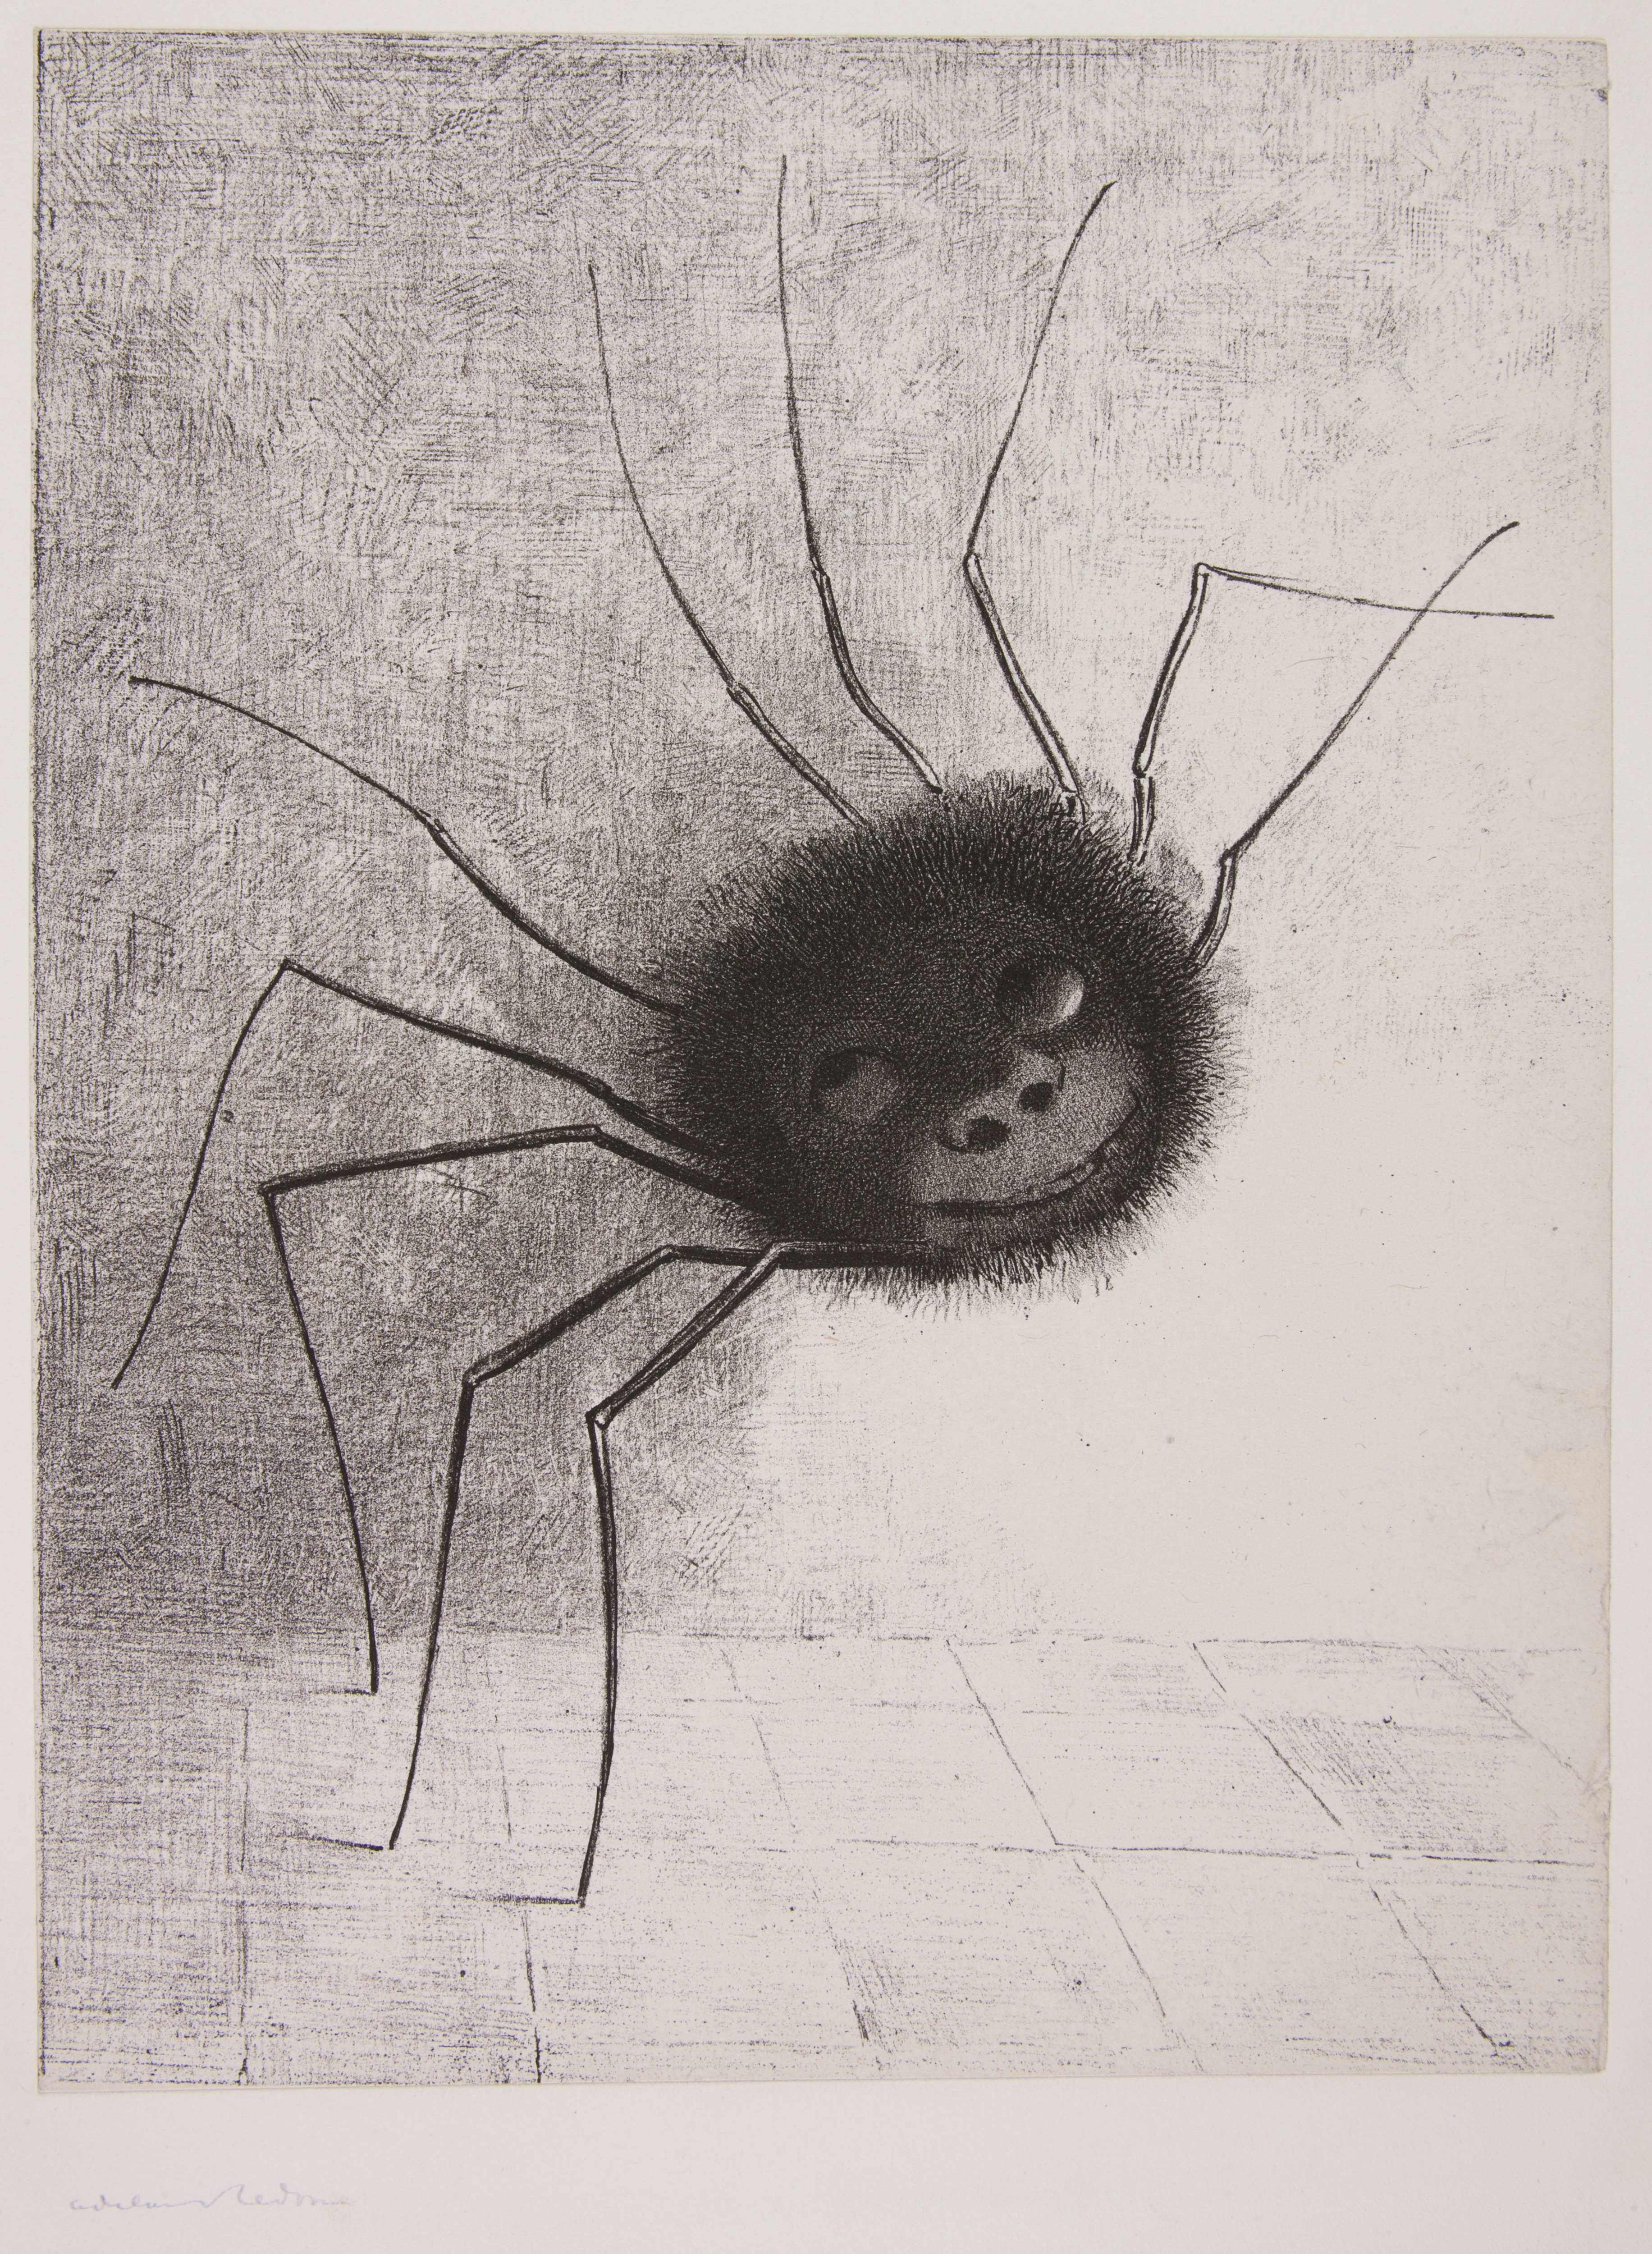 Spider by Odilon Redon - 1887 - - National Museum in Krakow